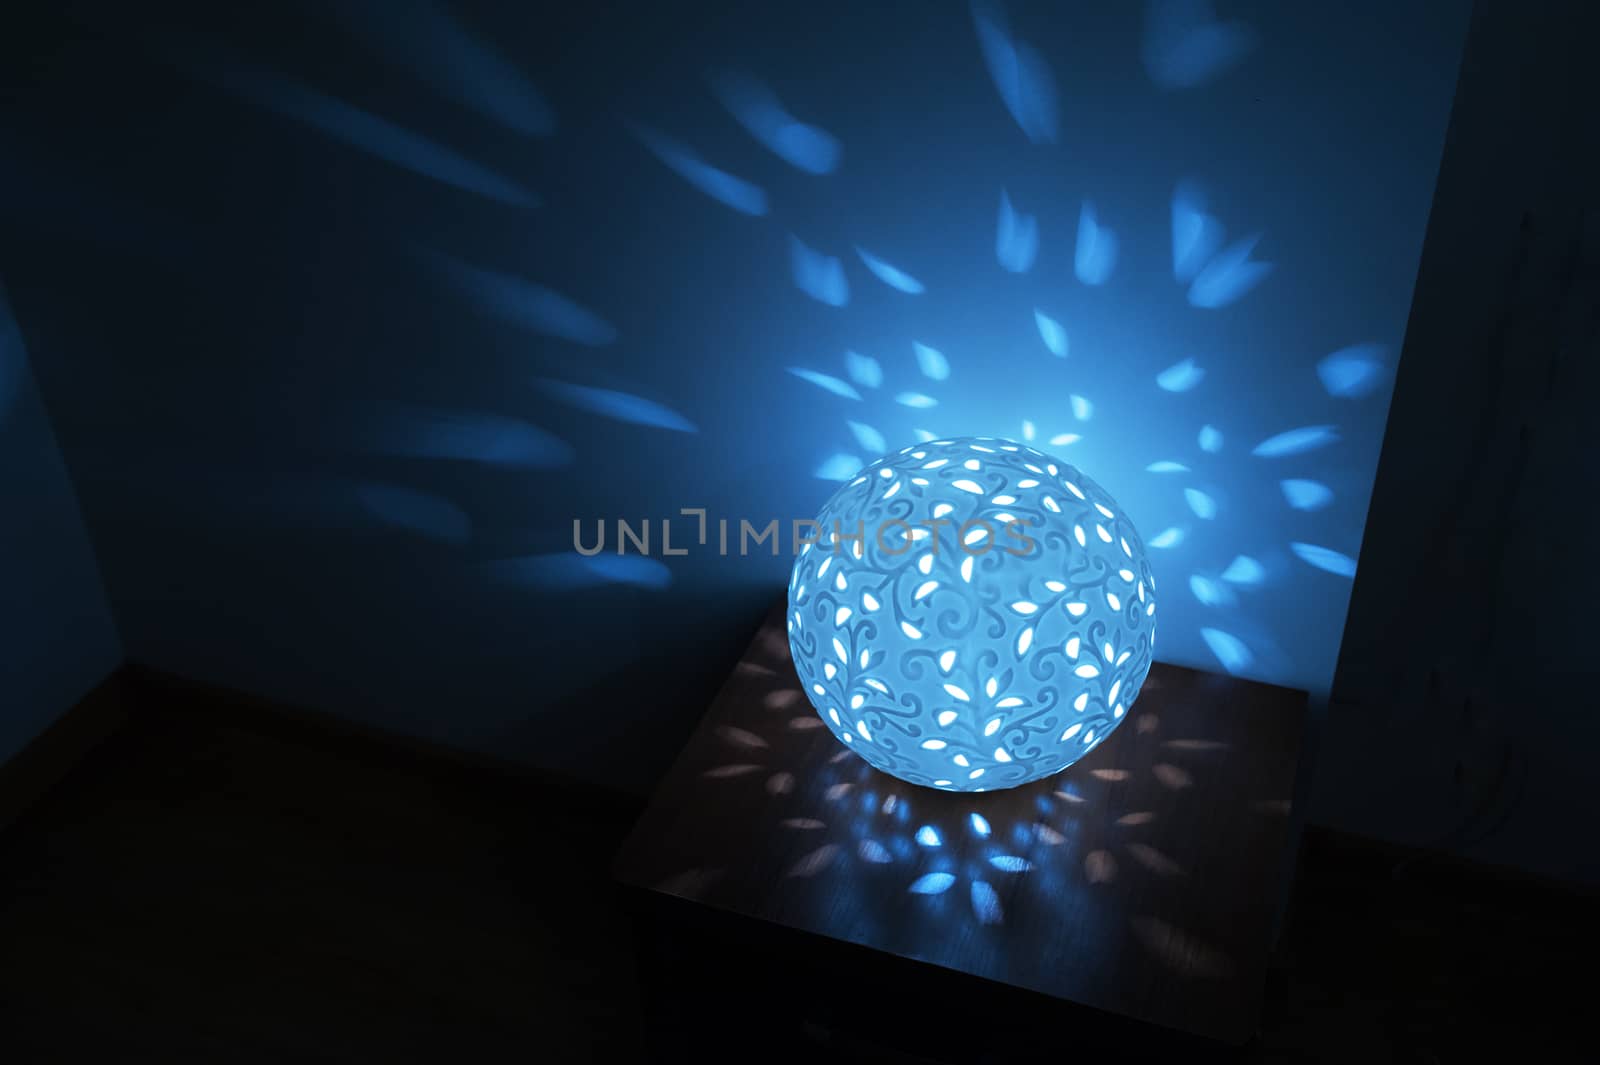 table lamp night light included by timonko